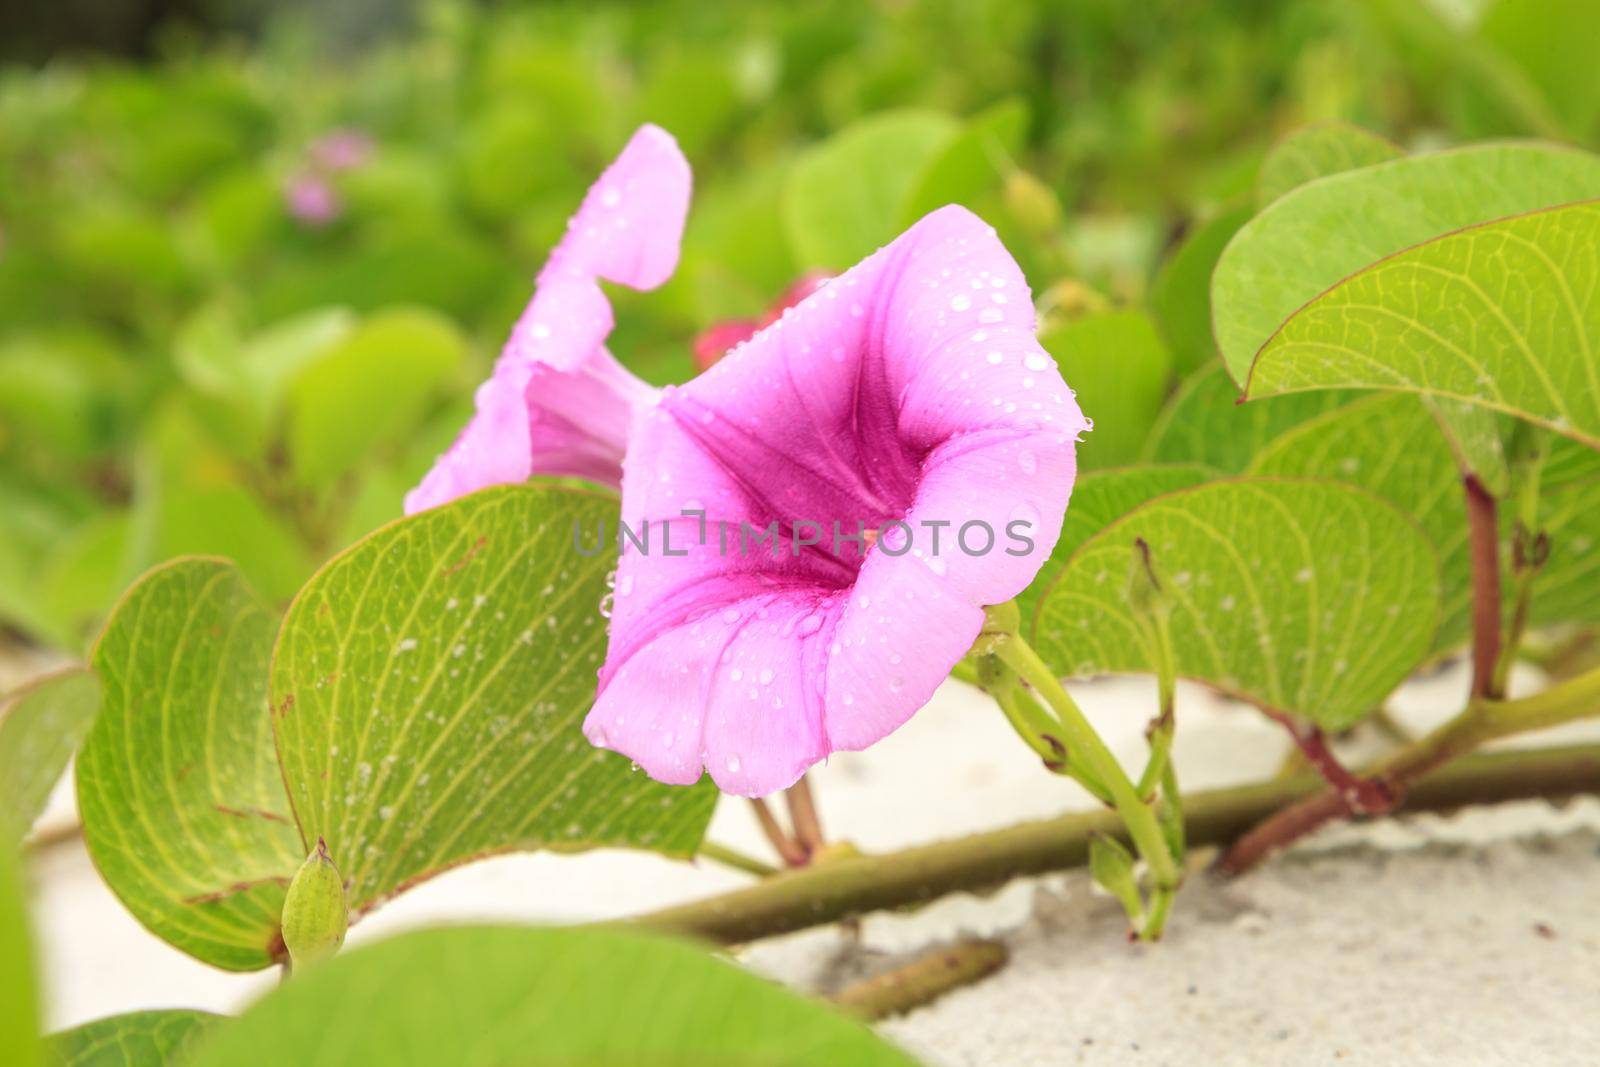 Cluster of purple flowers of a railroad vine in Florida.